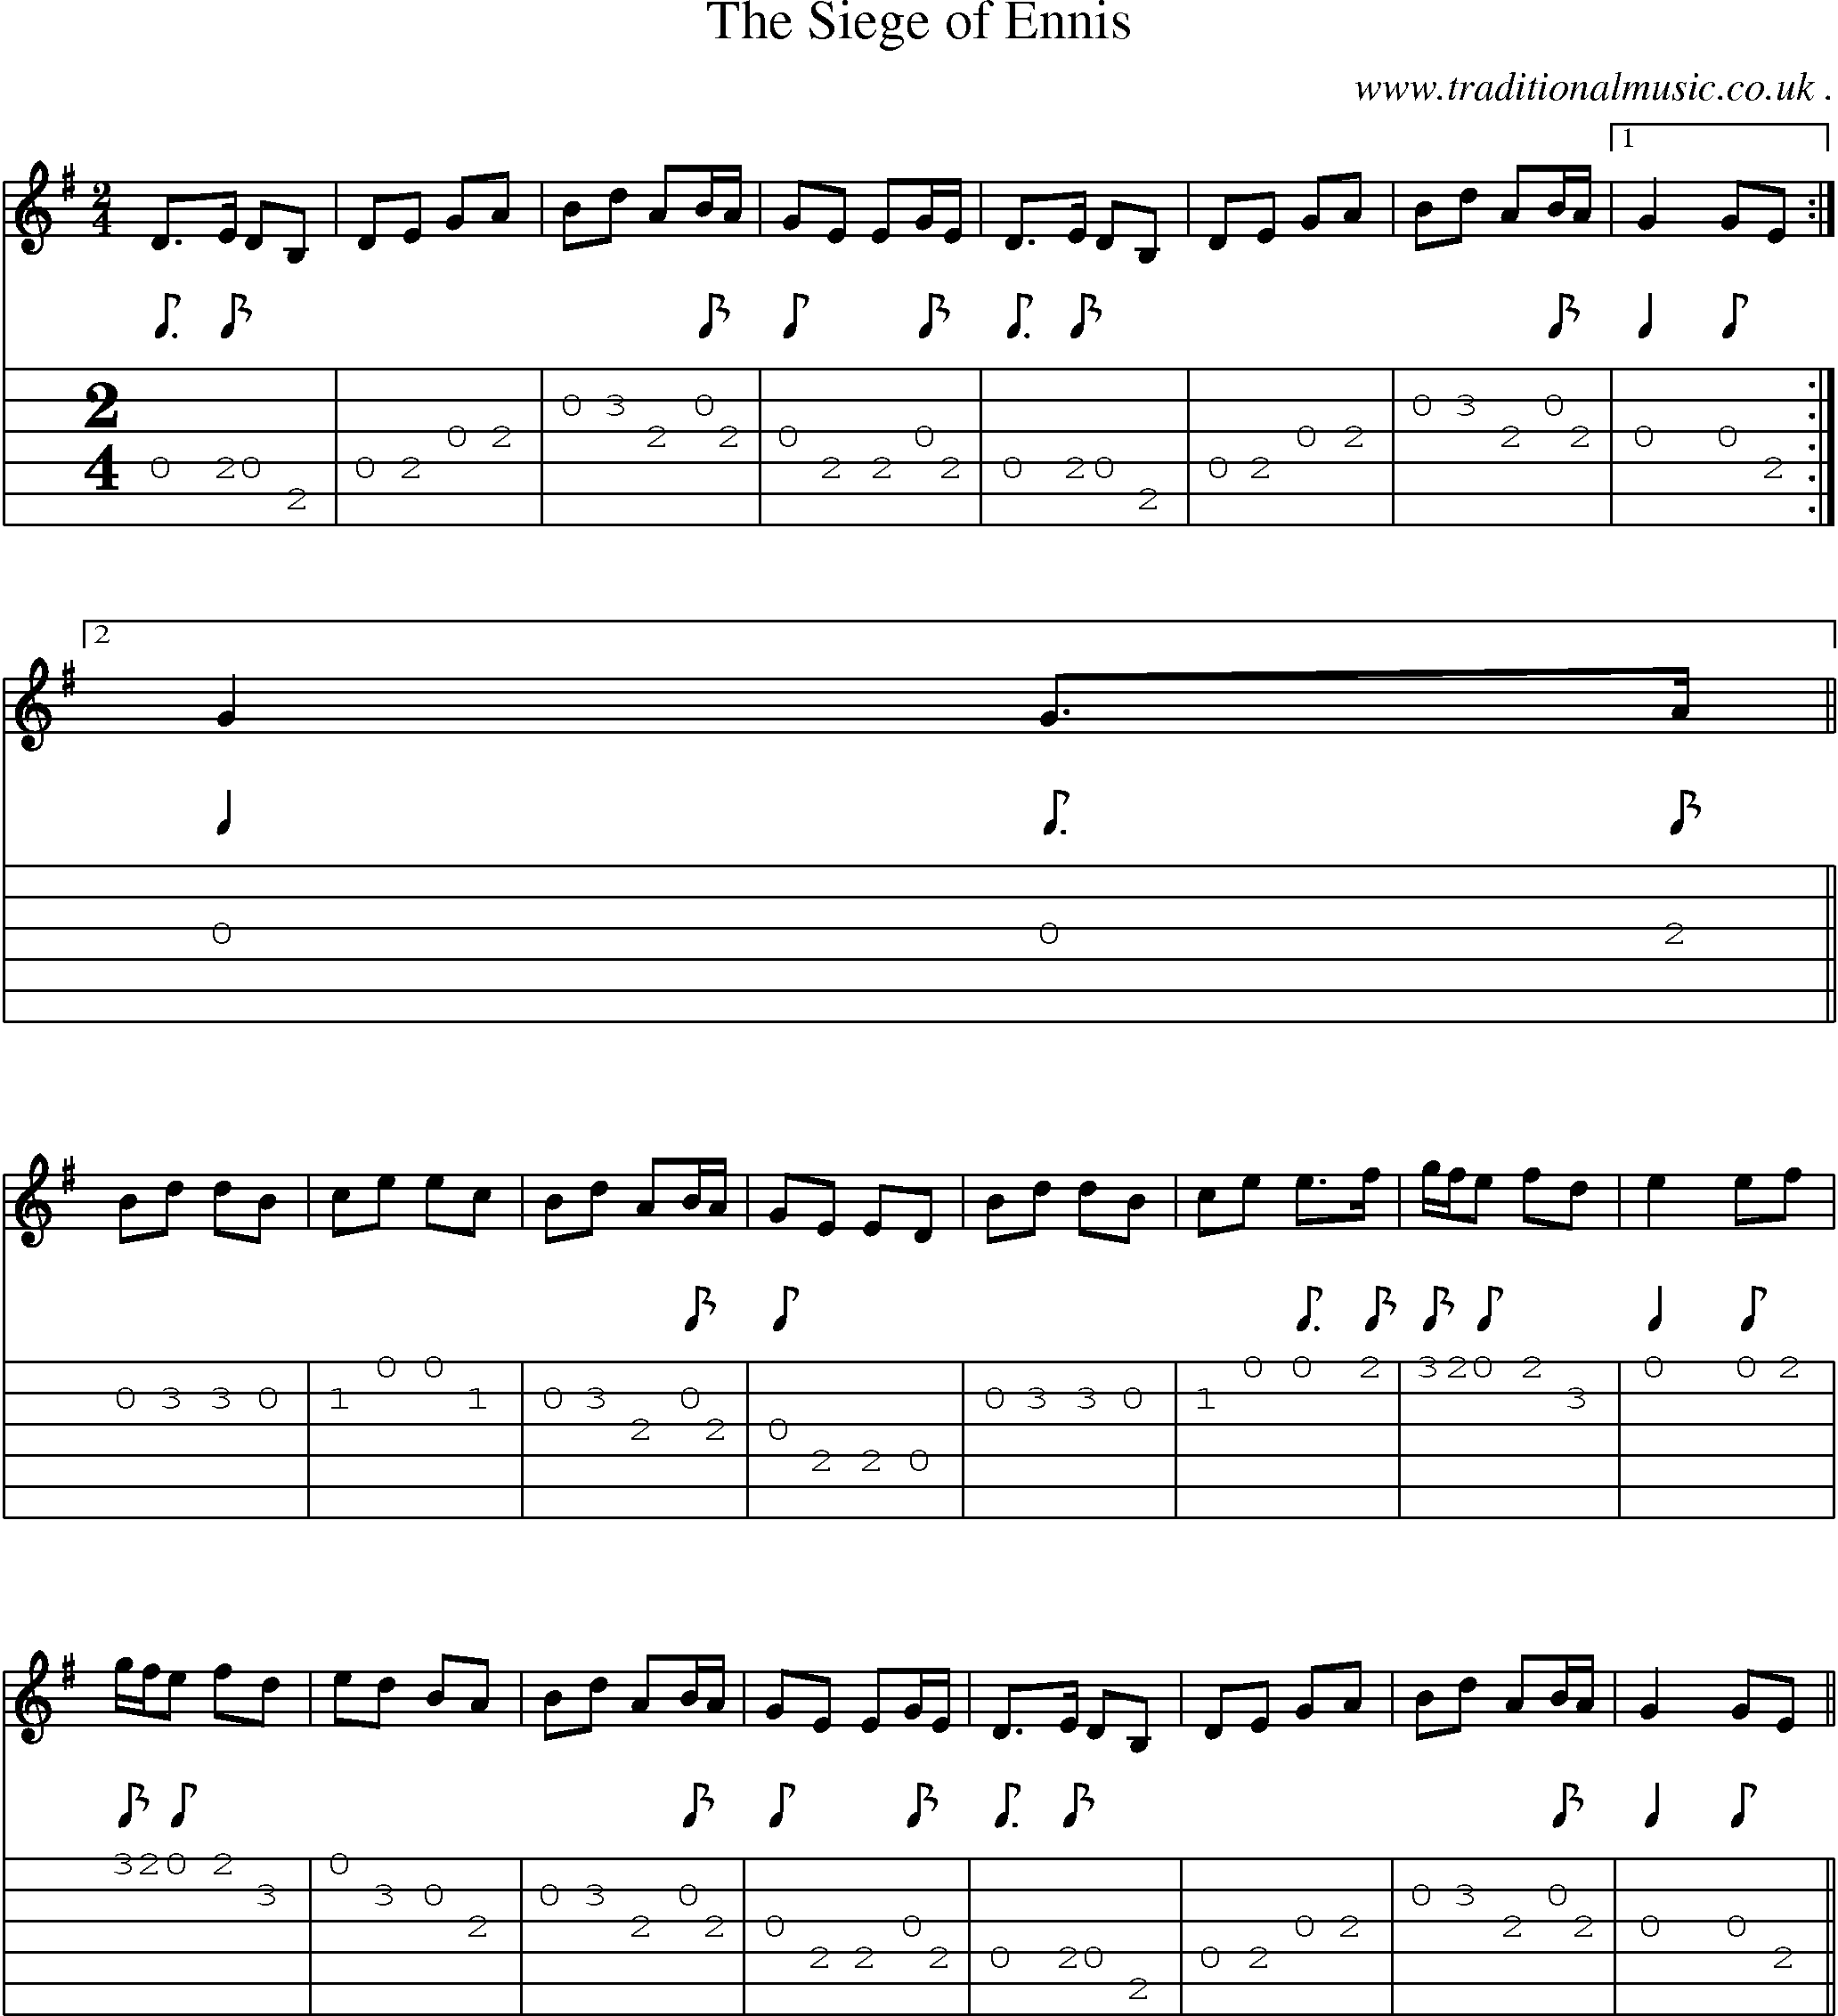 Sheet-Music and Guitar Tabs for The Siege Of Ennis